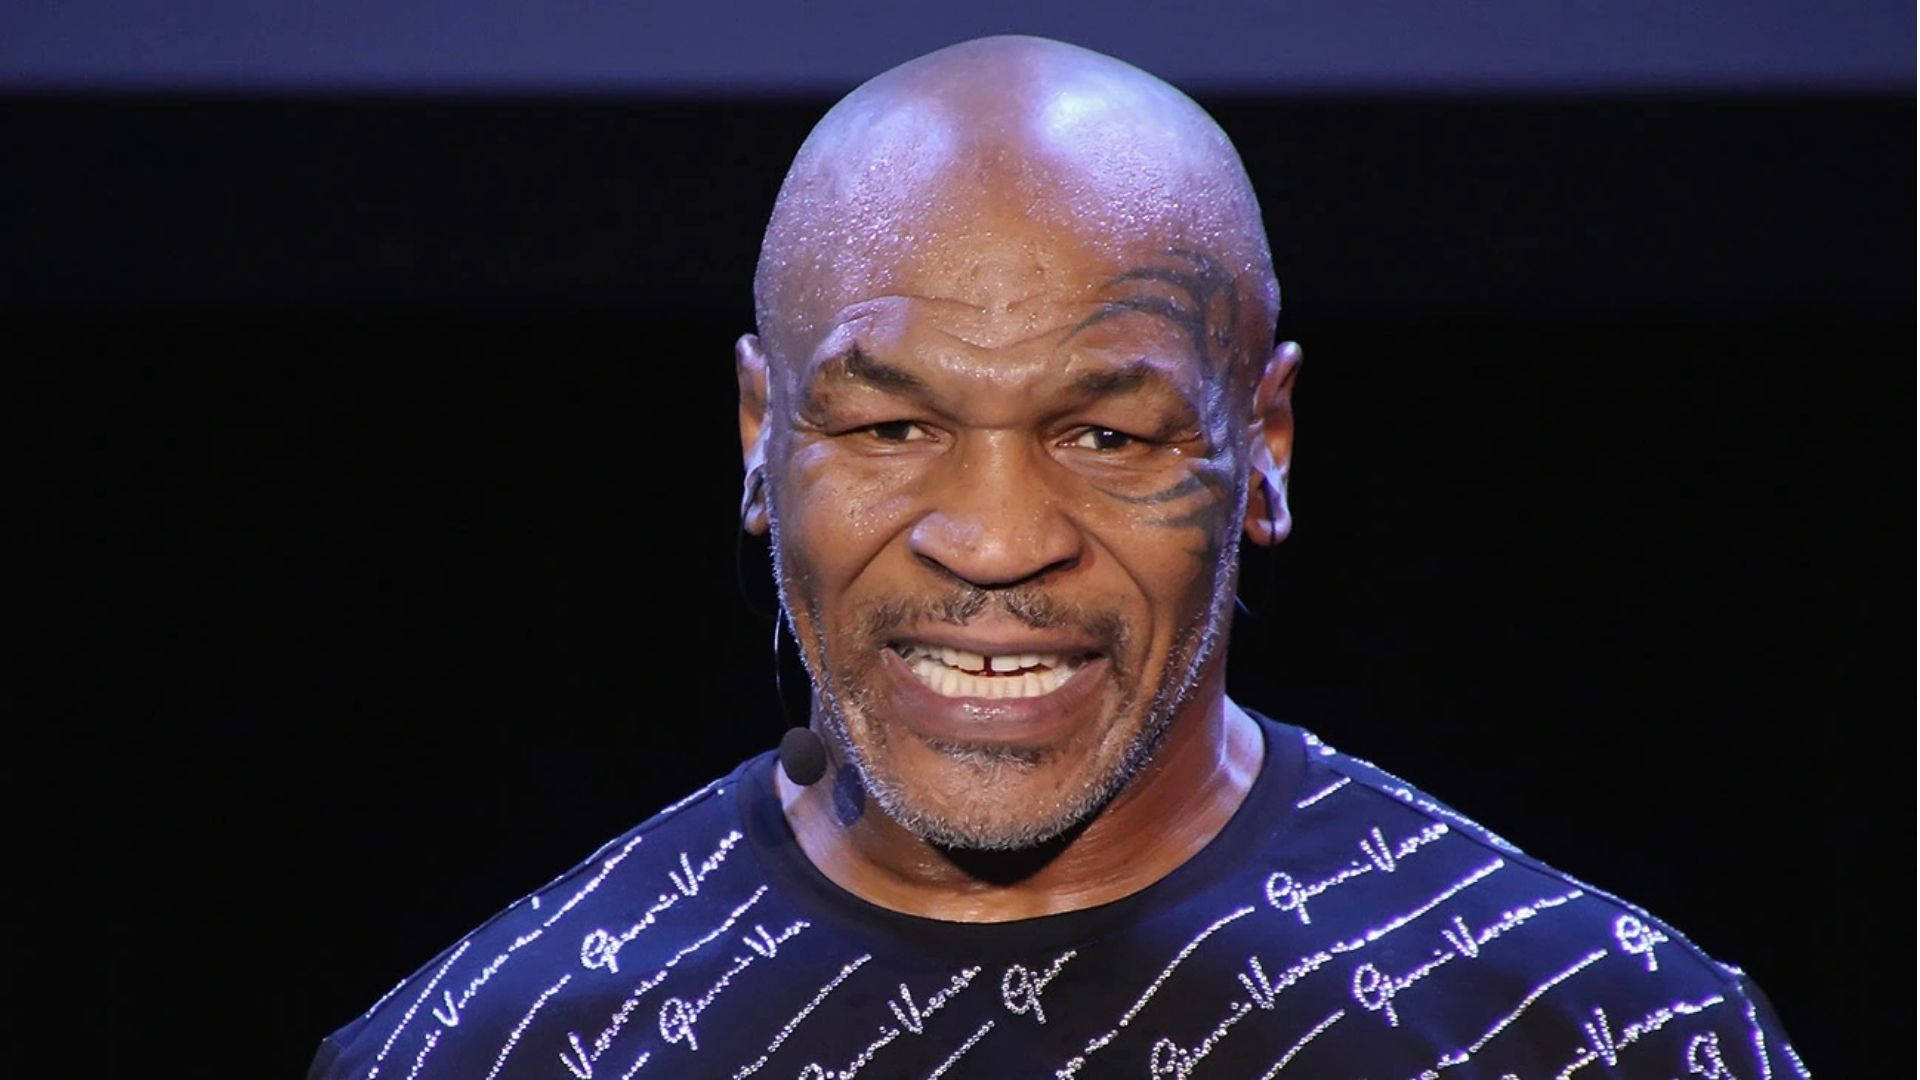 1920X1080 Mike Tyson Wallpaper and Background